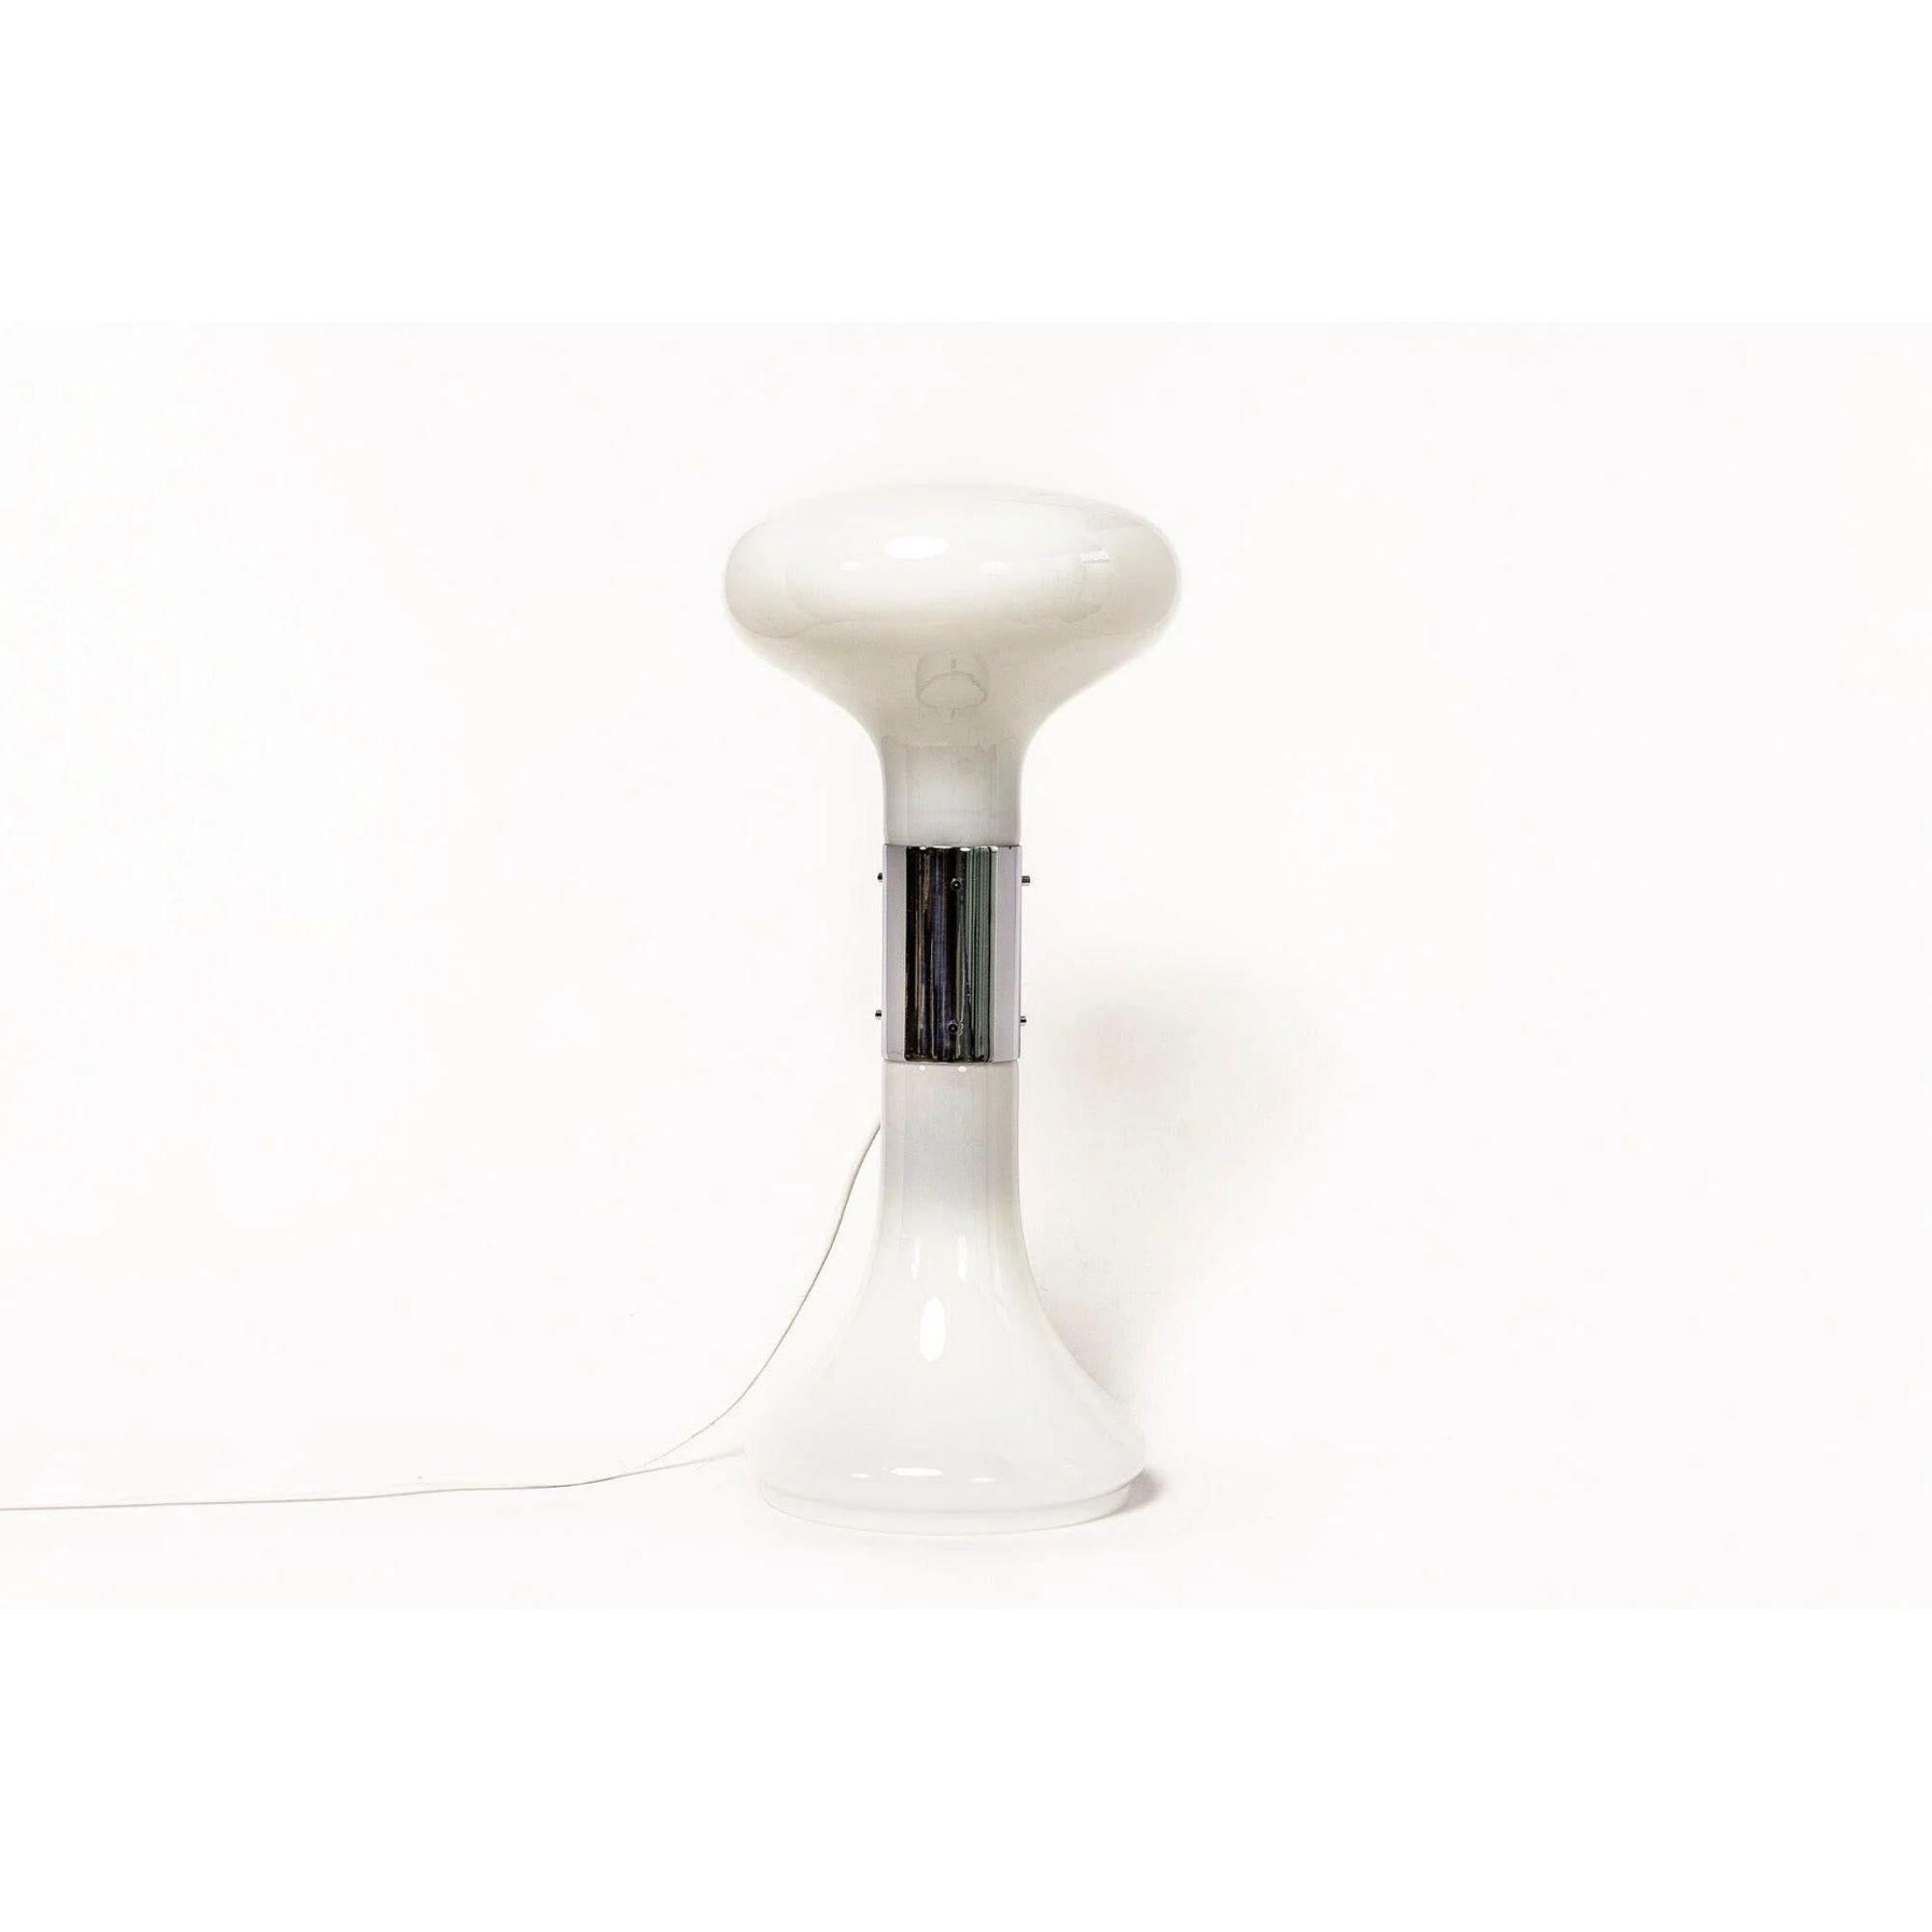 This stunning vintage Carlo Nason for A.V. Mazzega rare table lamp was made in Italy circa 1970. The Double Sided milk white hourglass-shaped lamp is made from hand blown Murano glass and is accented with a silver polished steel center band. This